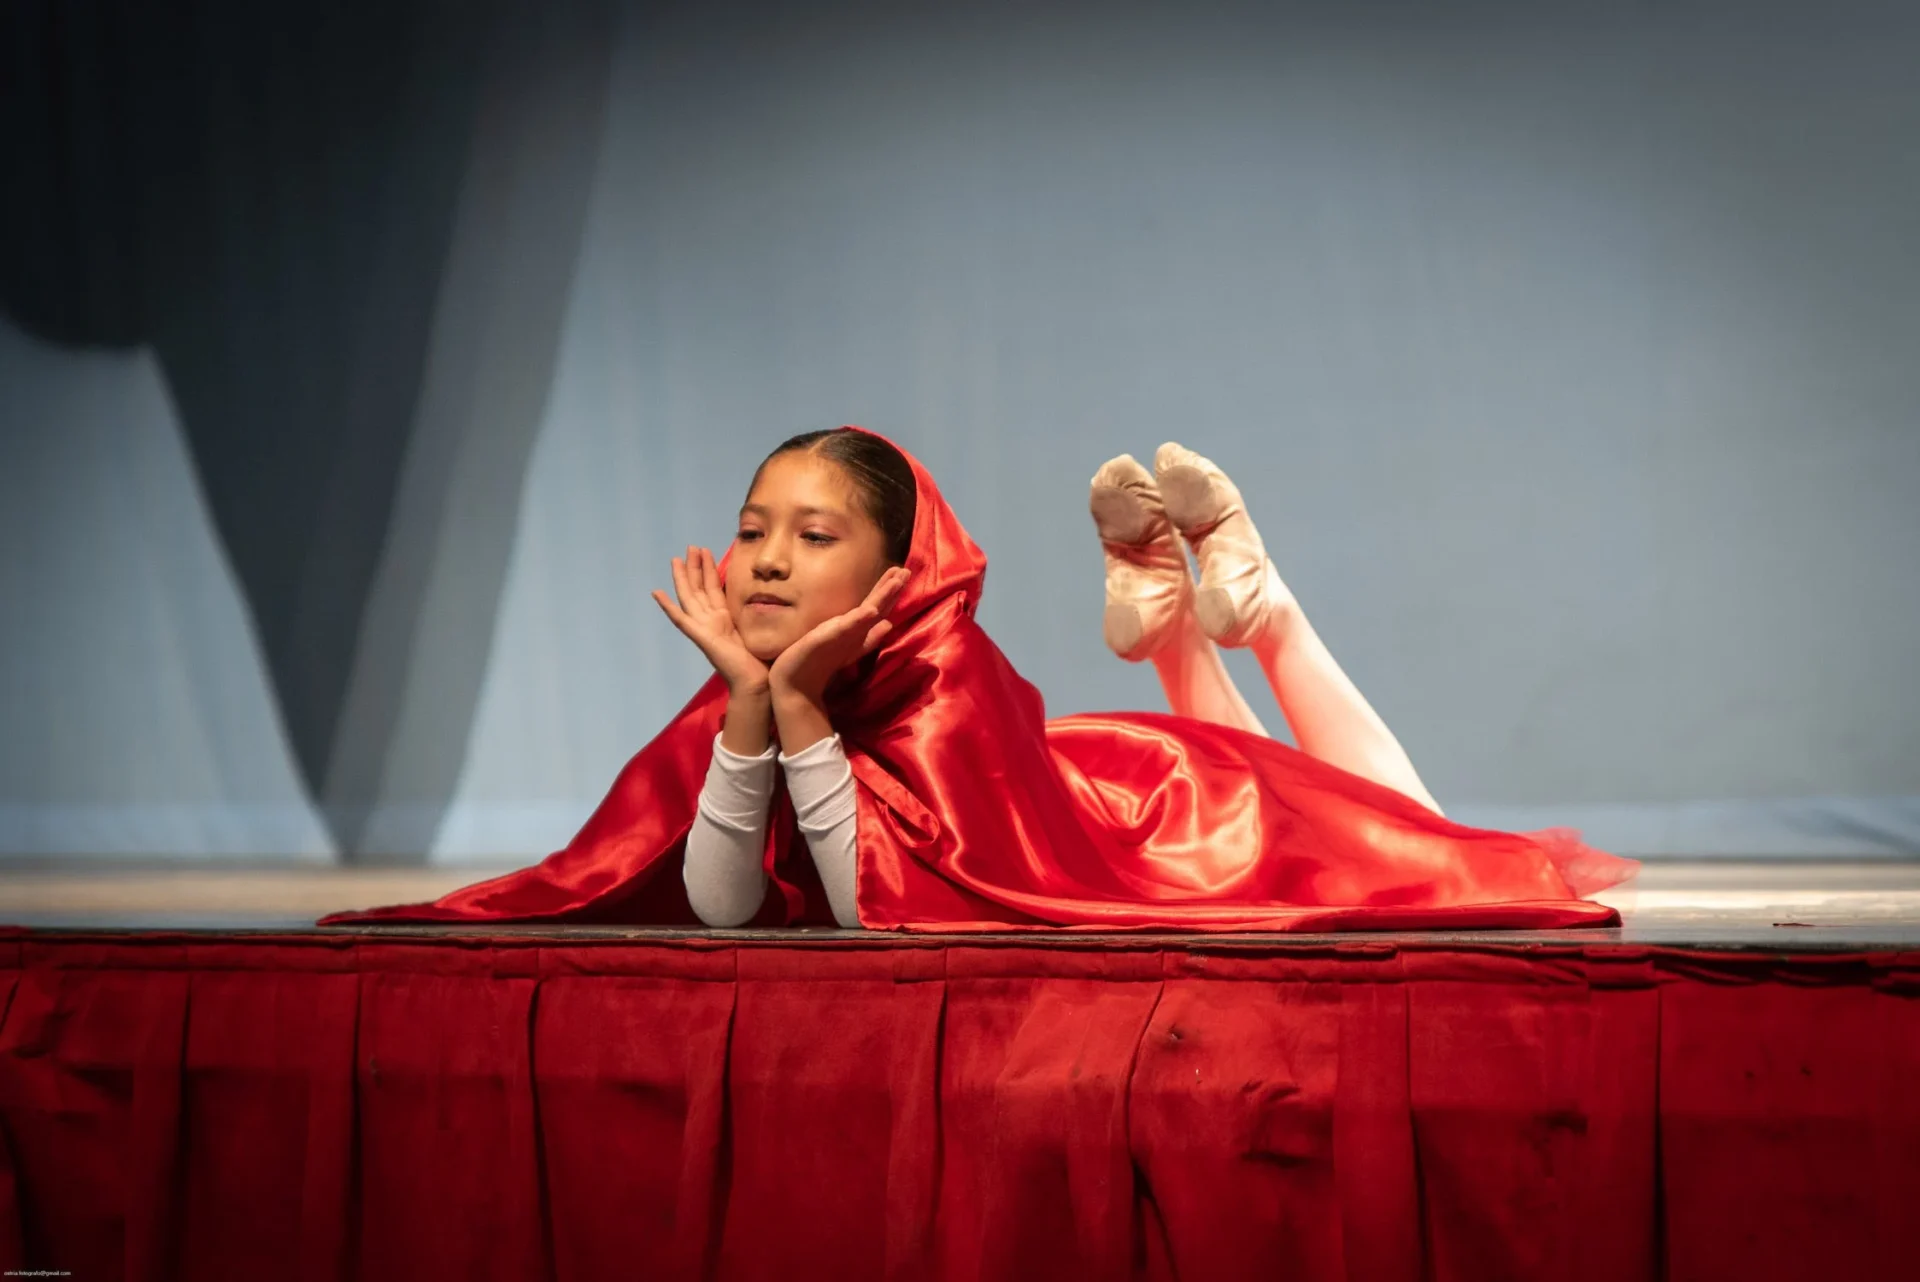 A woman in red is laying on the stage